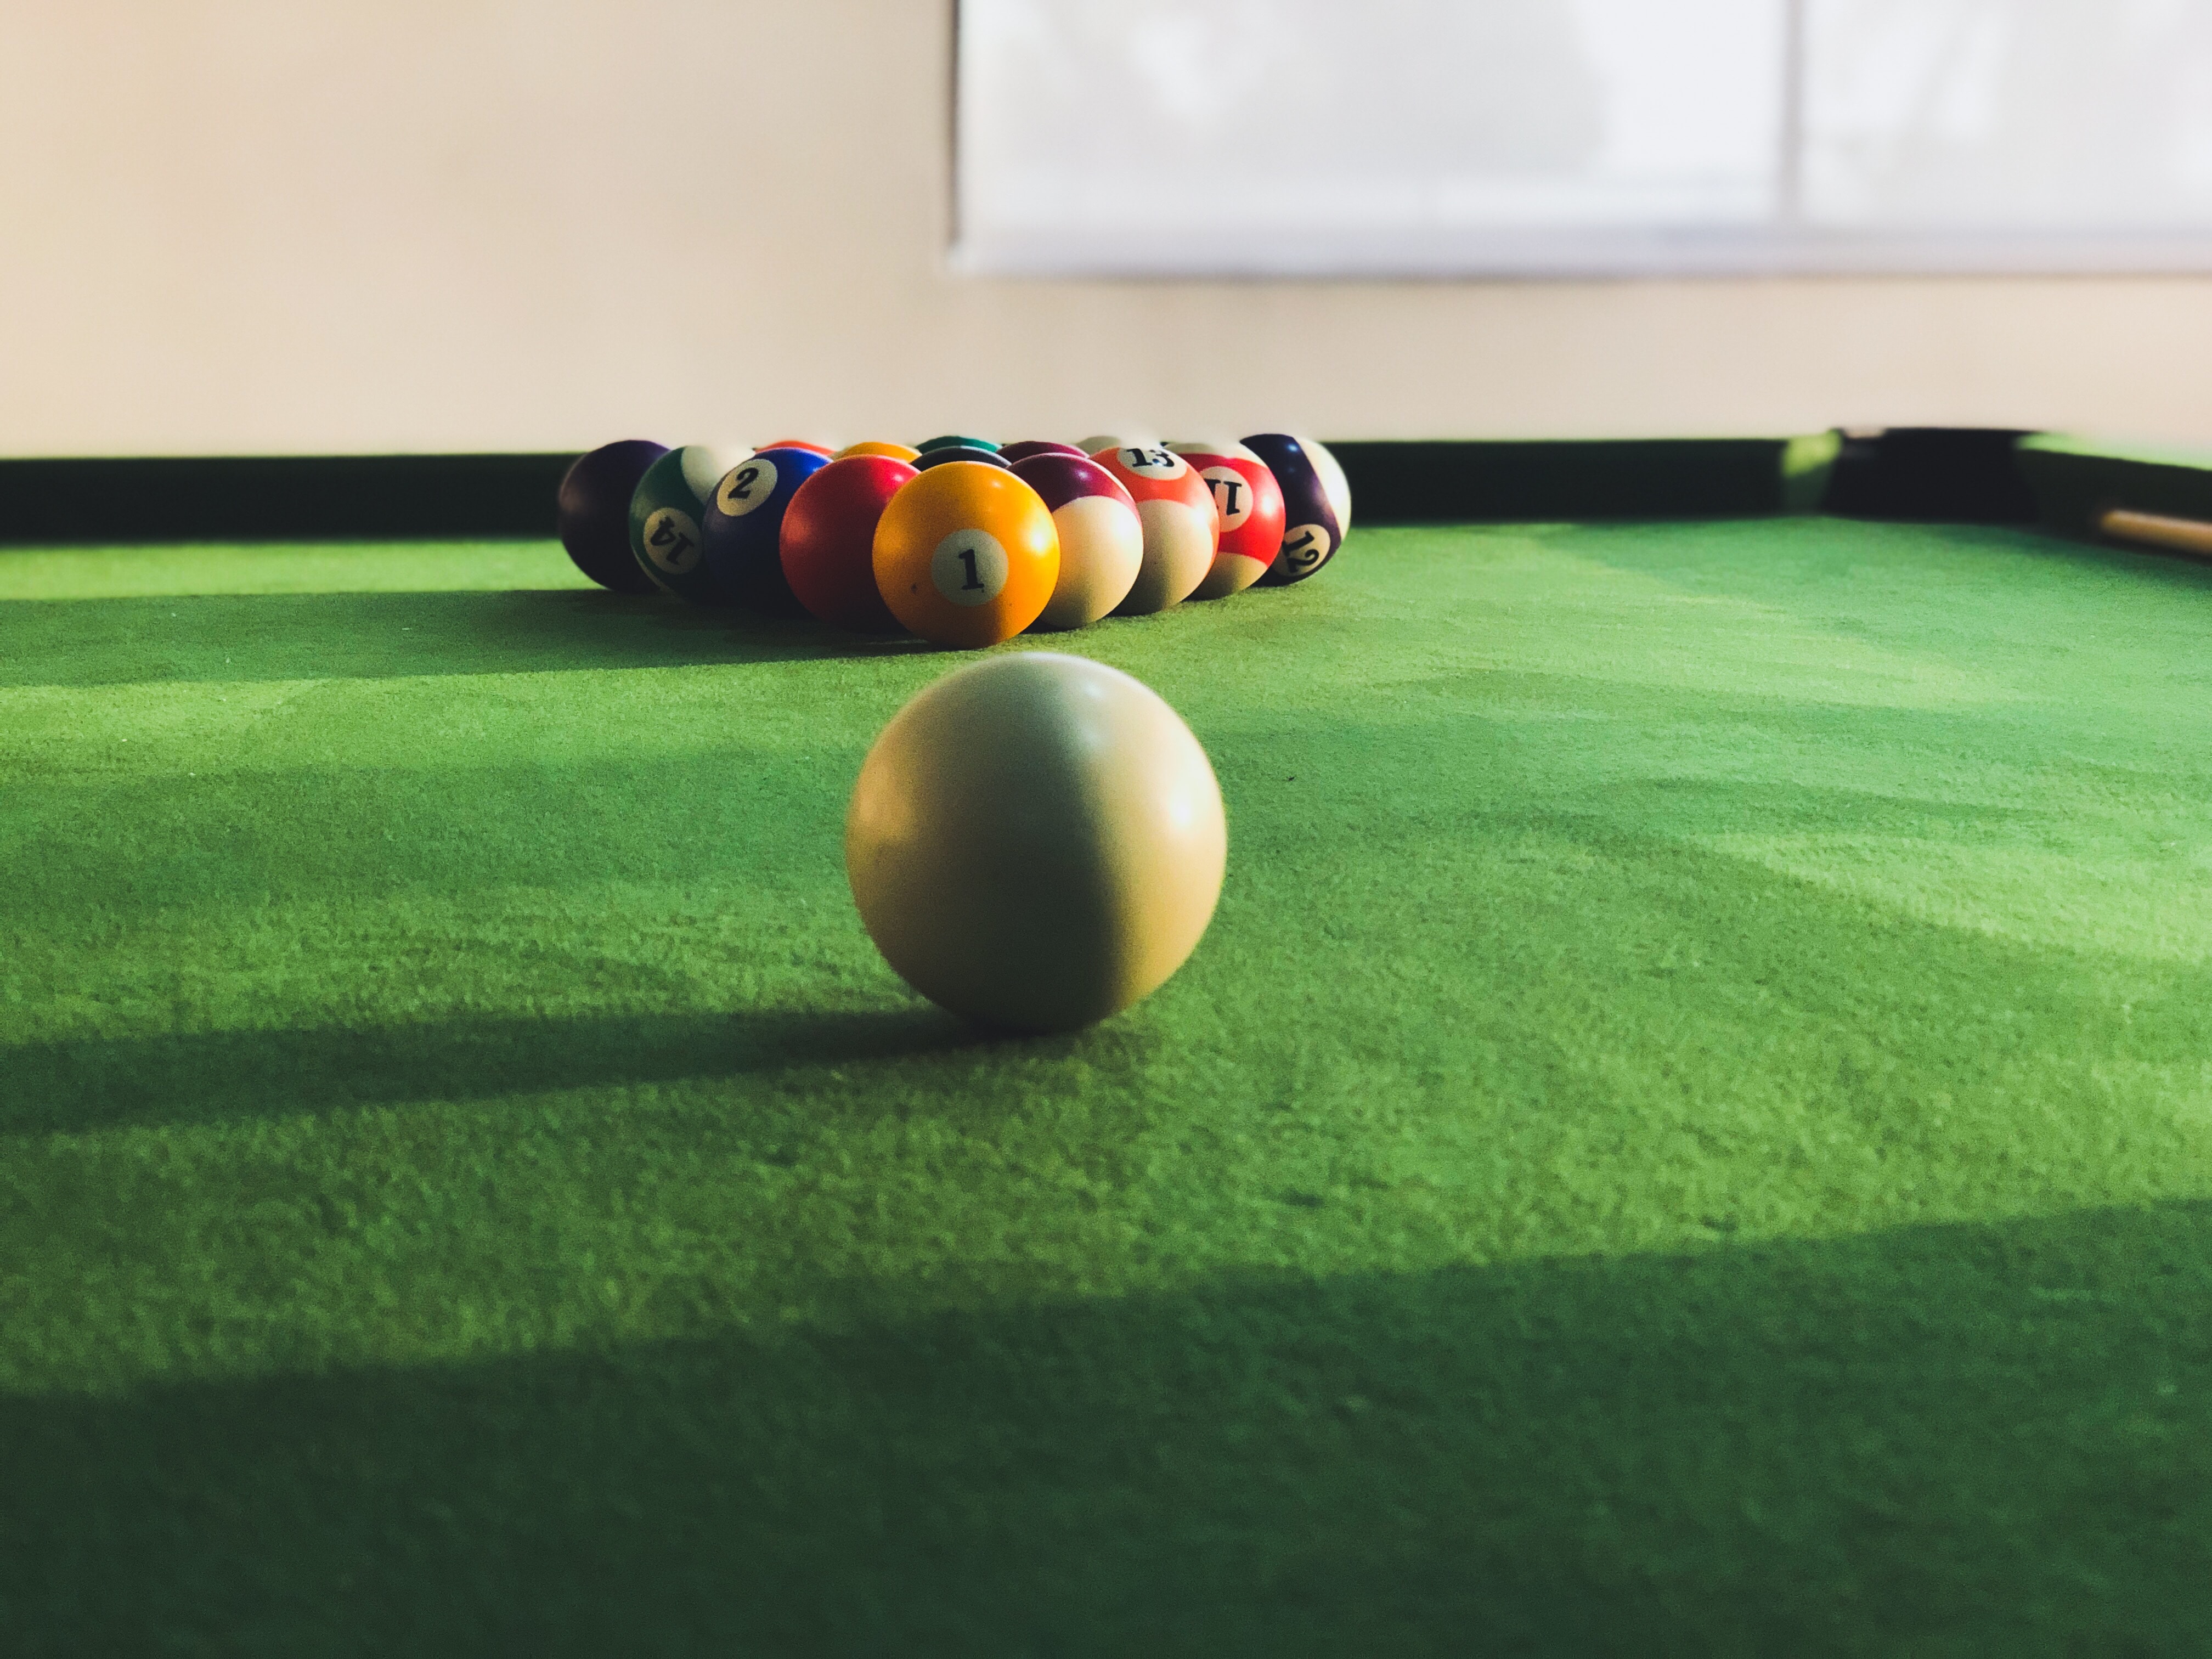 Racked pool balls and cue on pool table